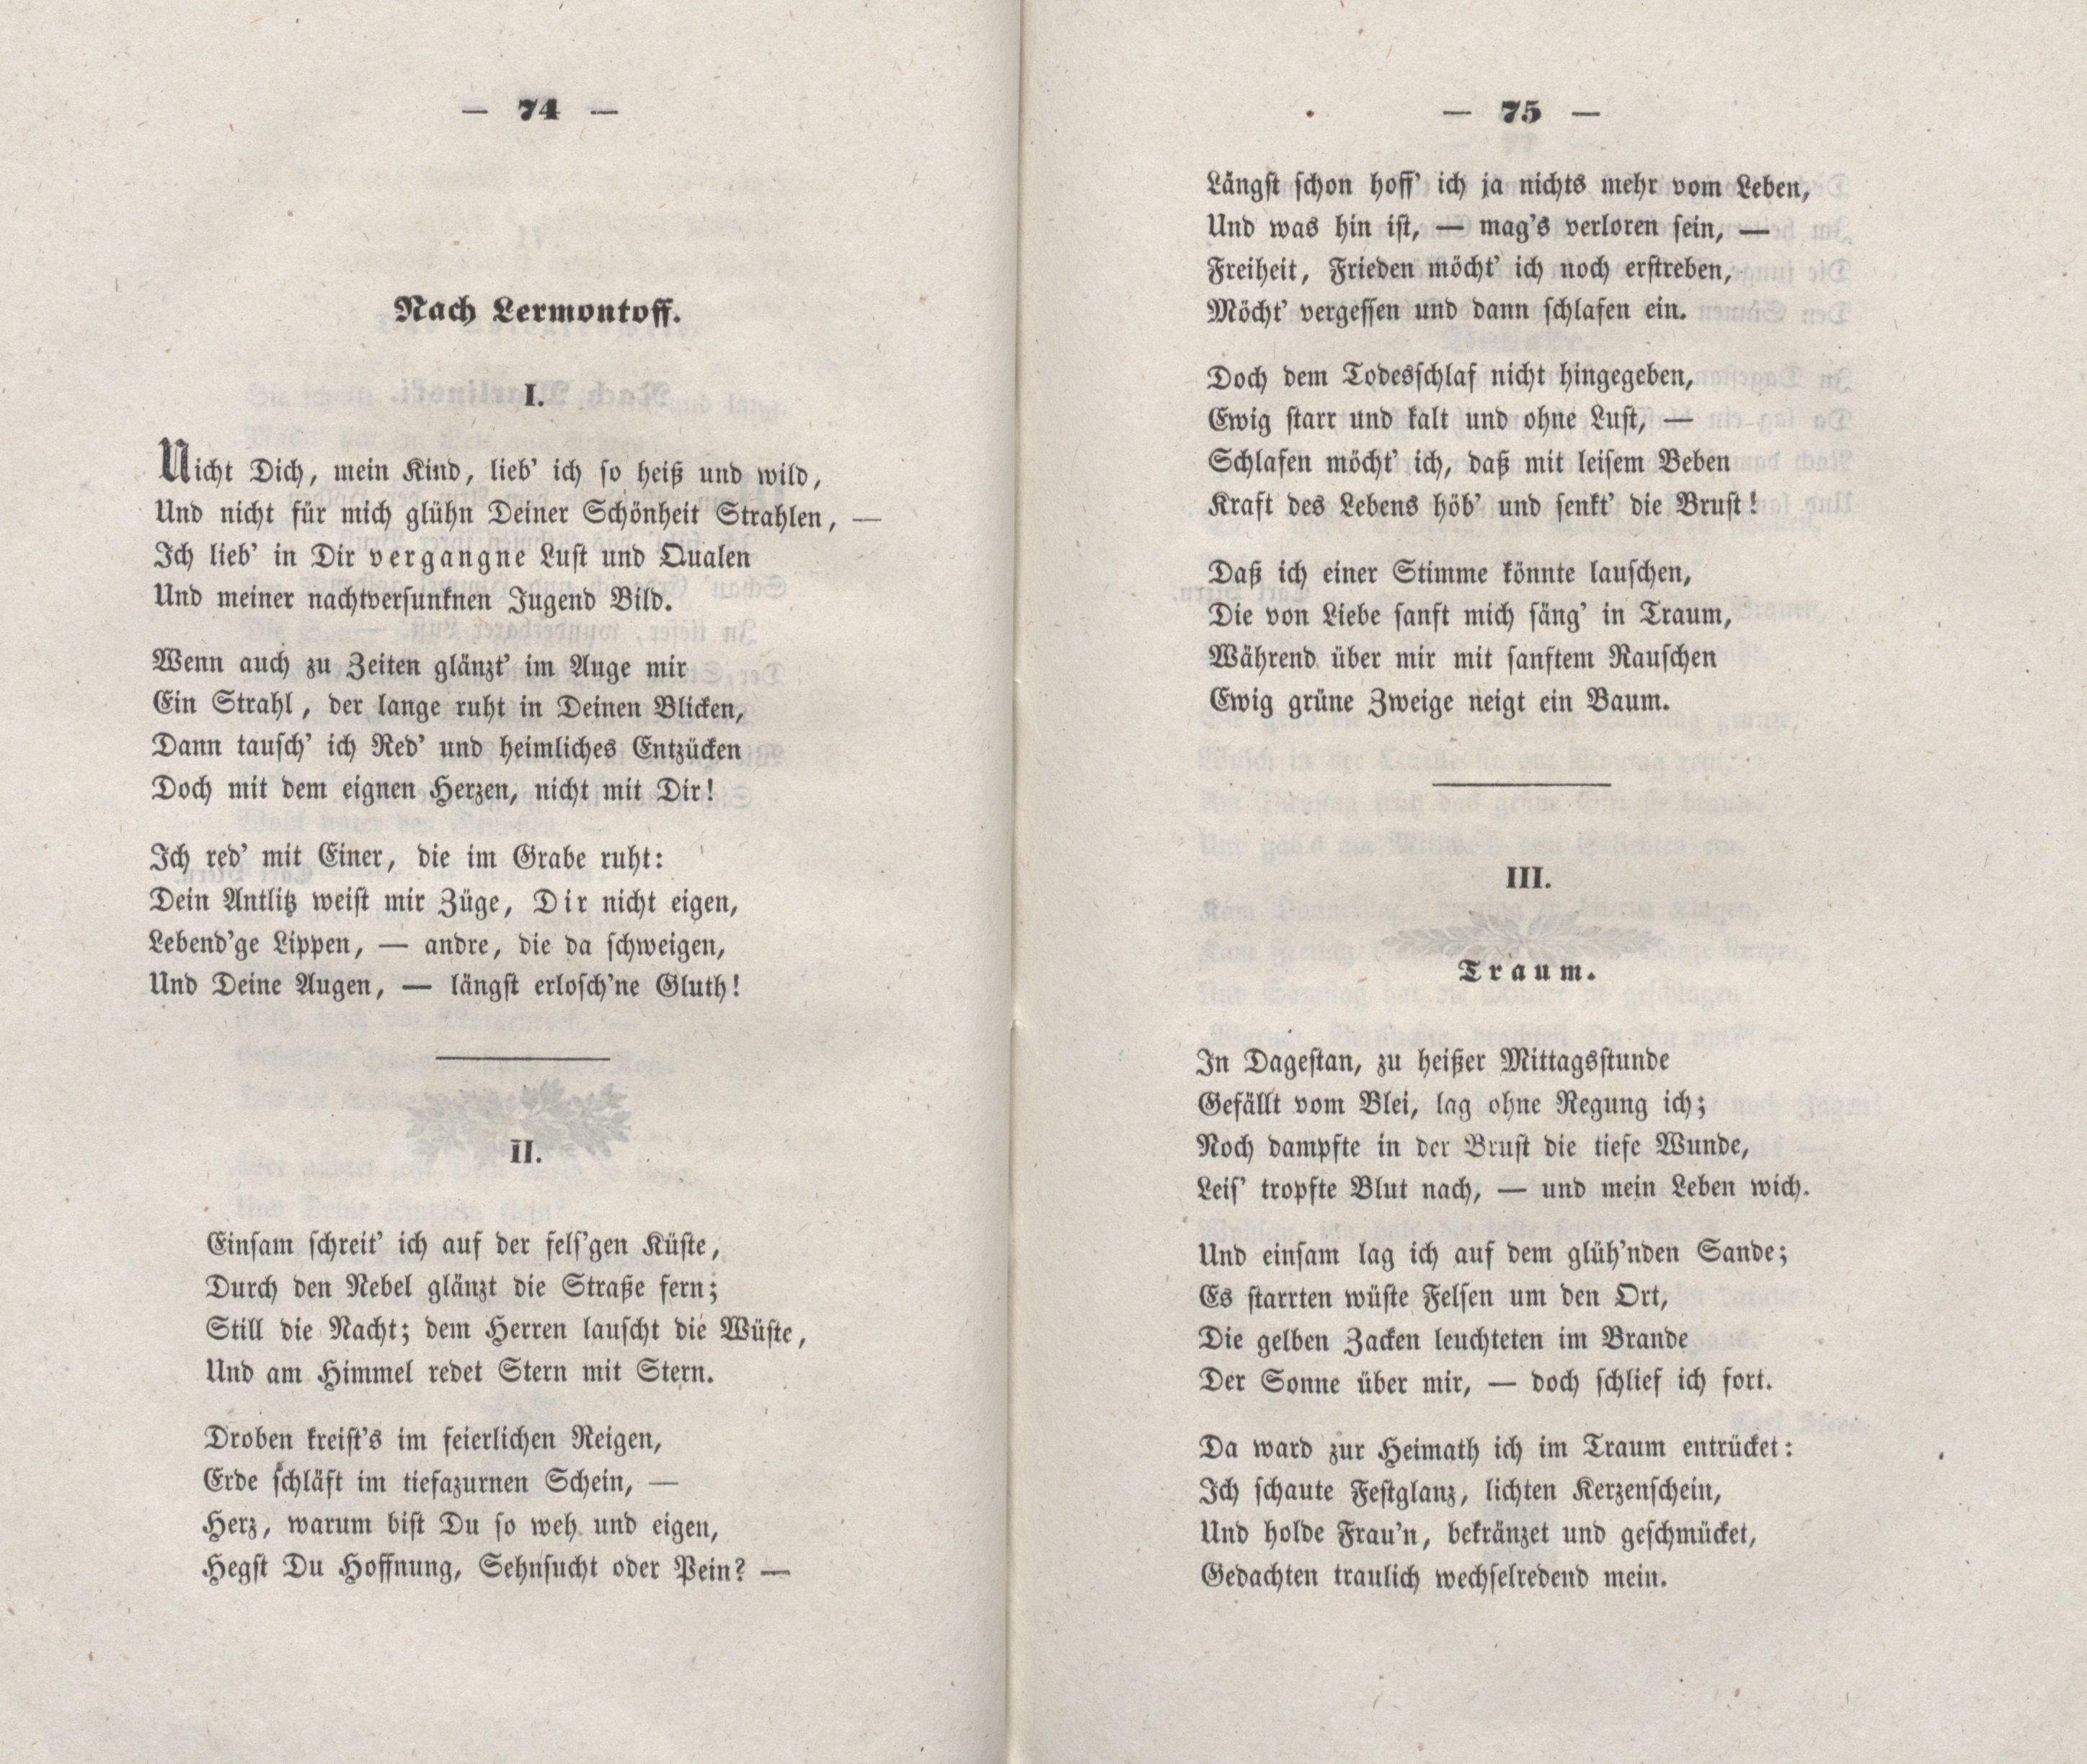 Traum (1848) | 1. (74-75) Main body of text